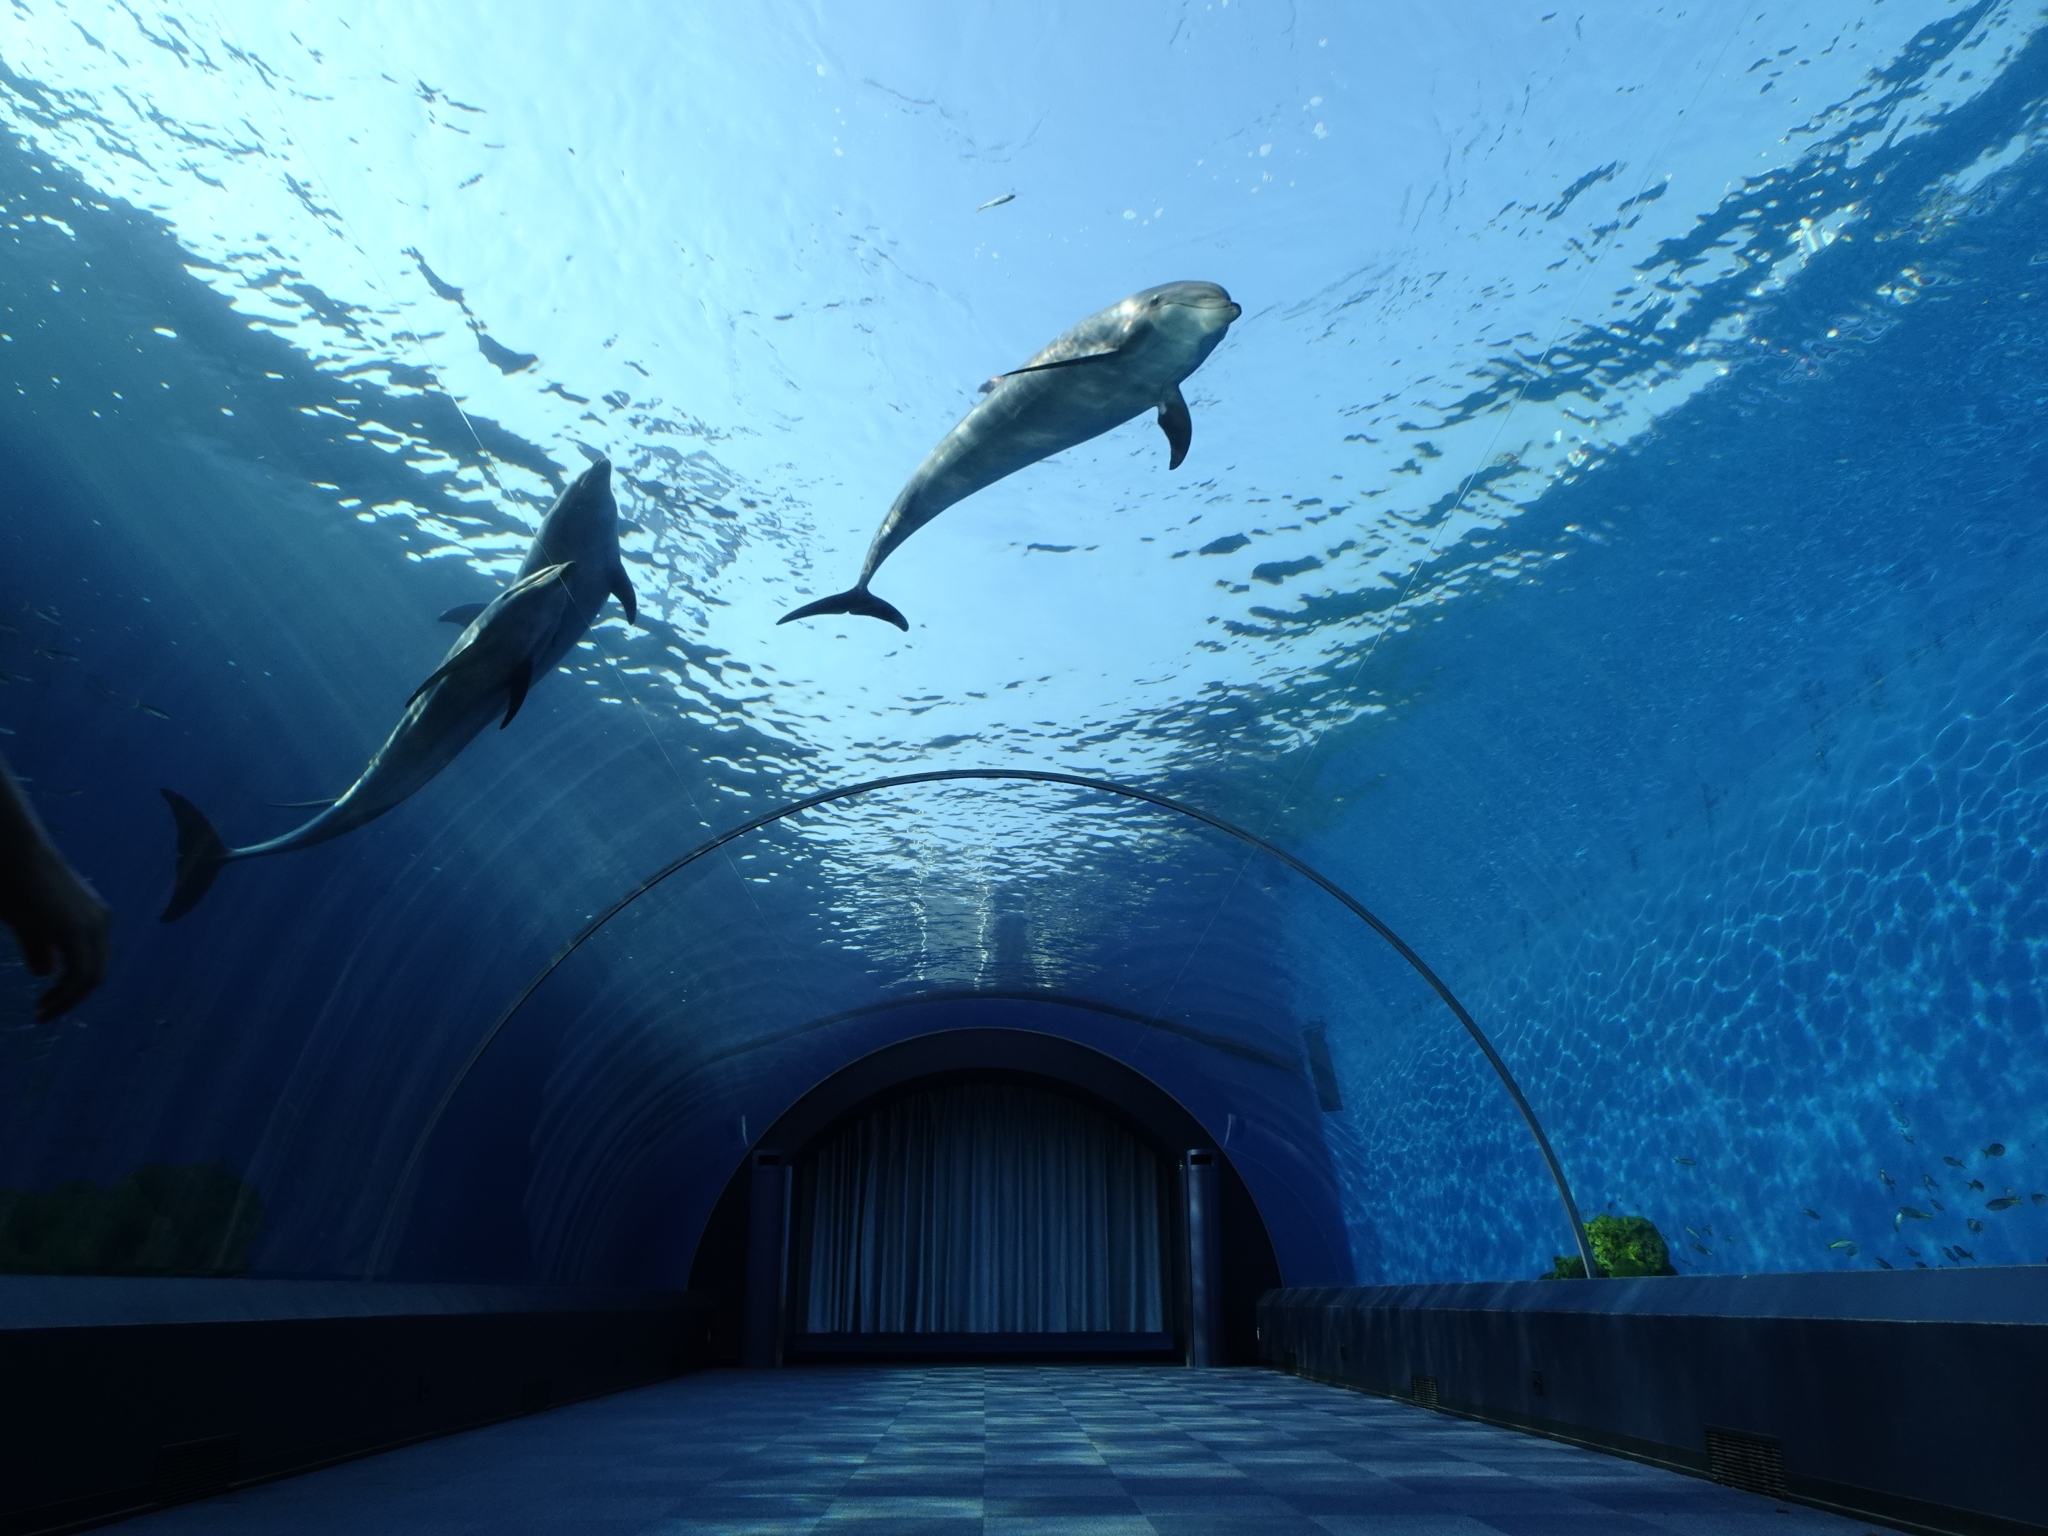 An aquarium walkway tunnel with two dolphins swimming overhead